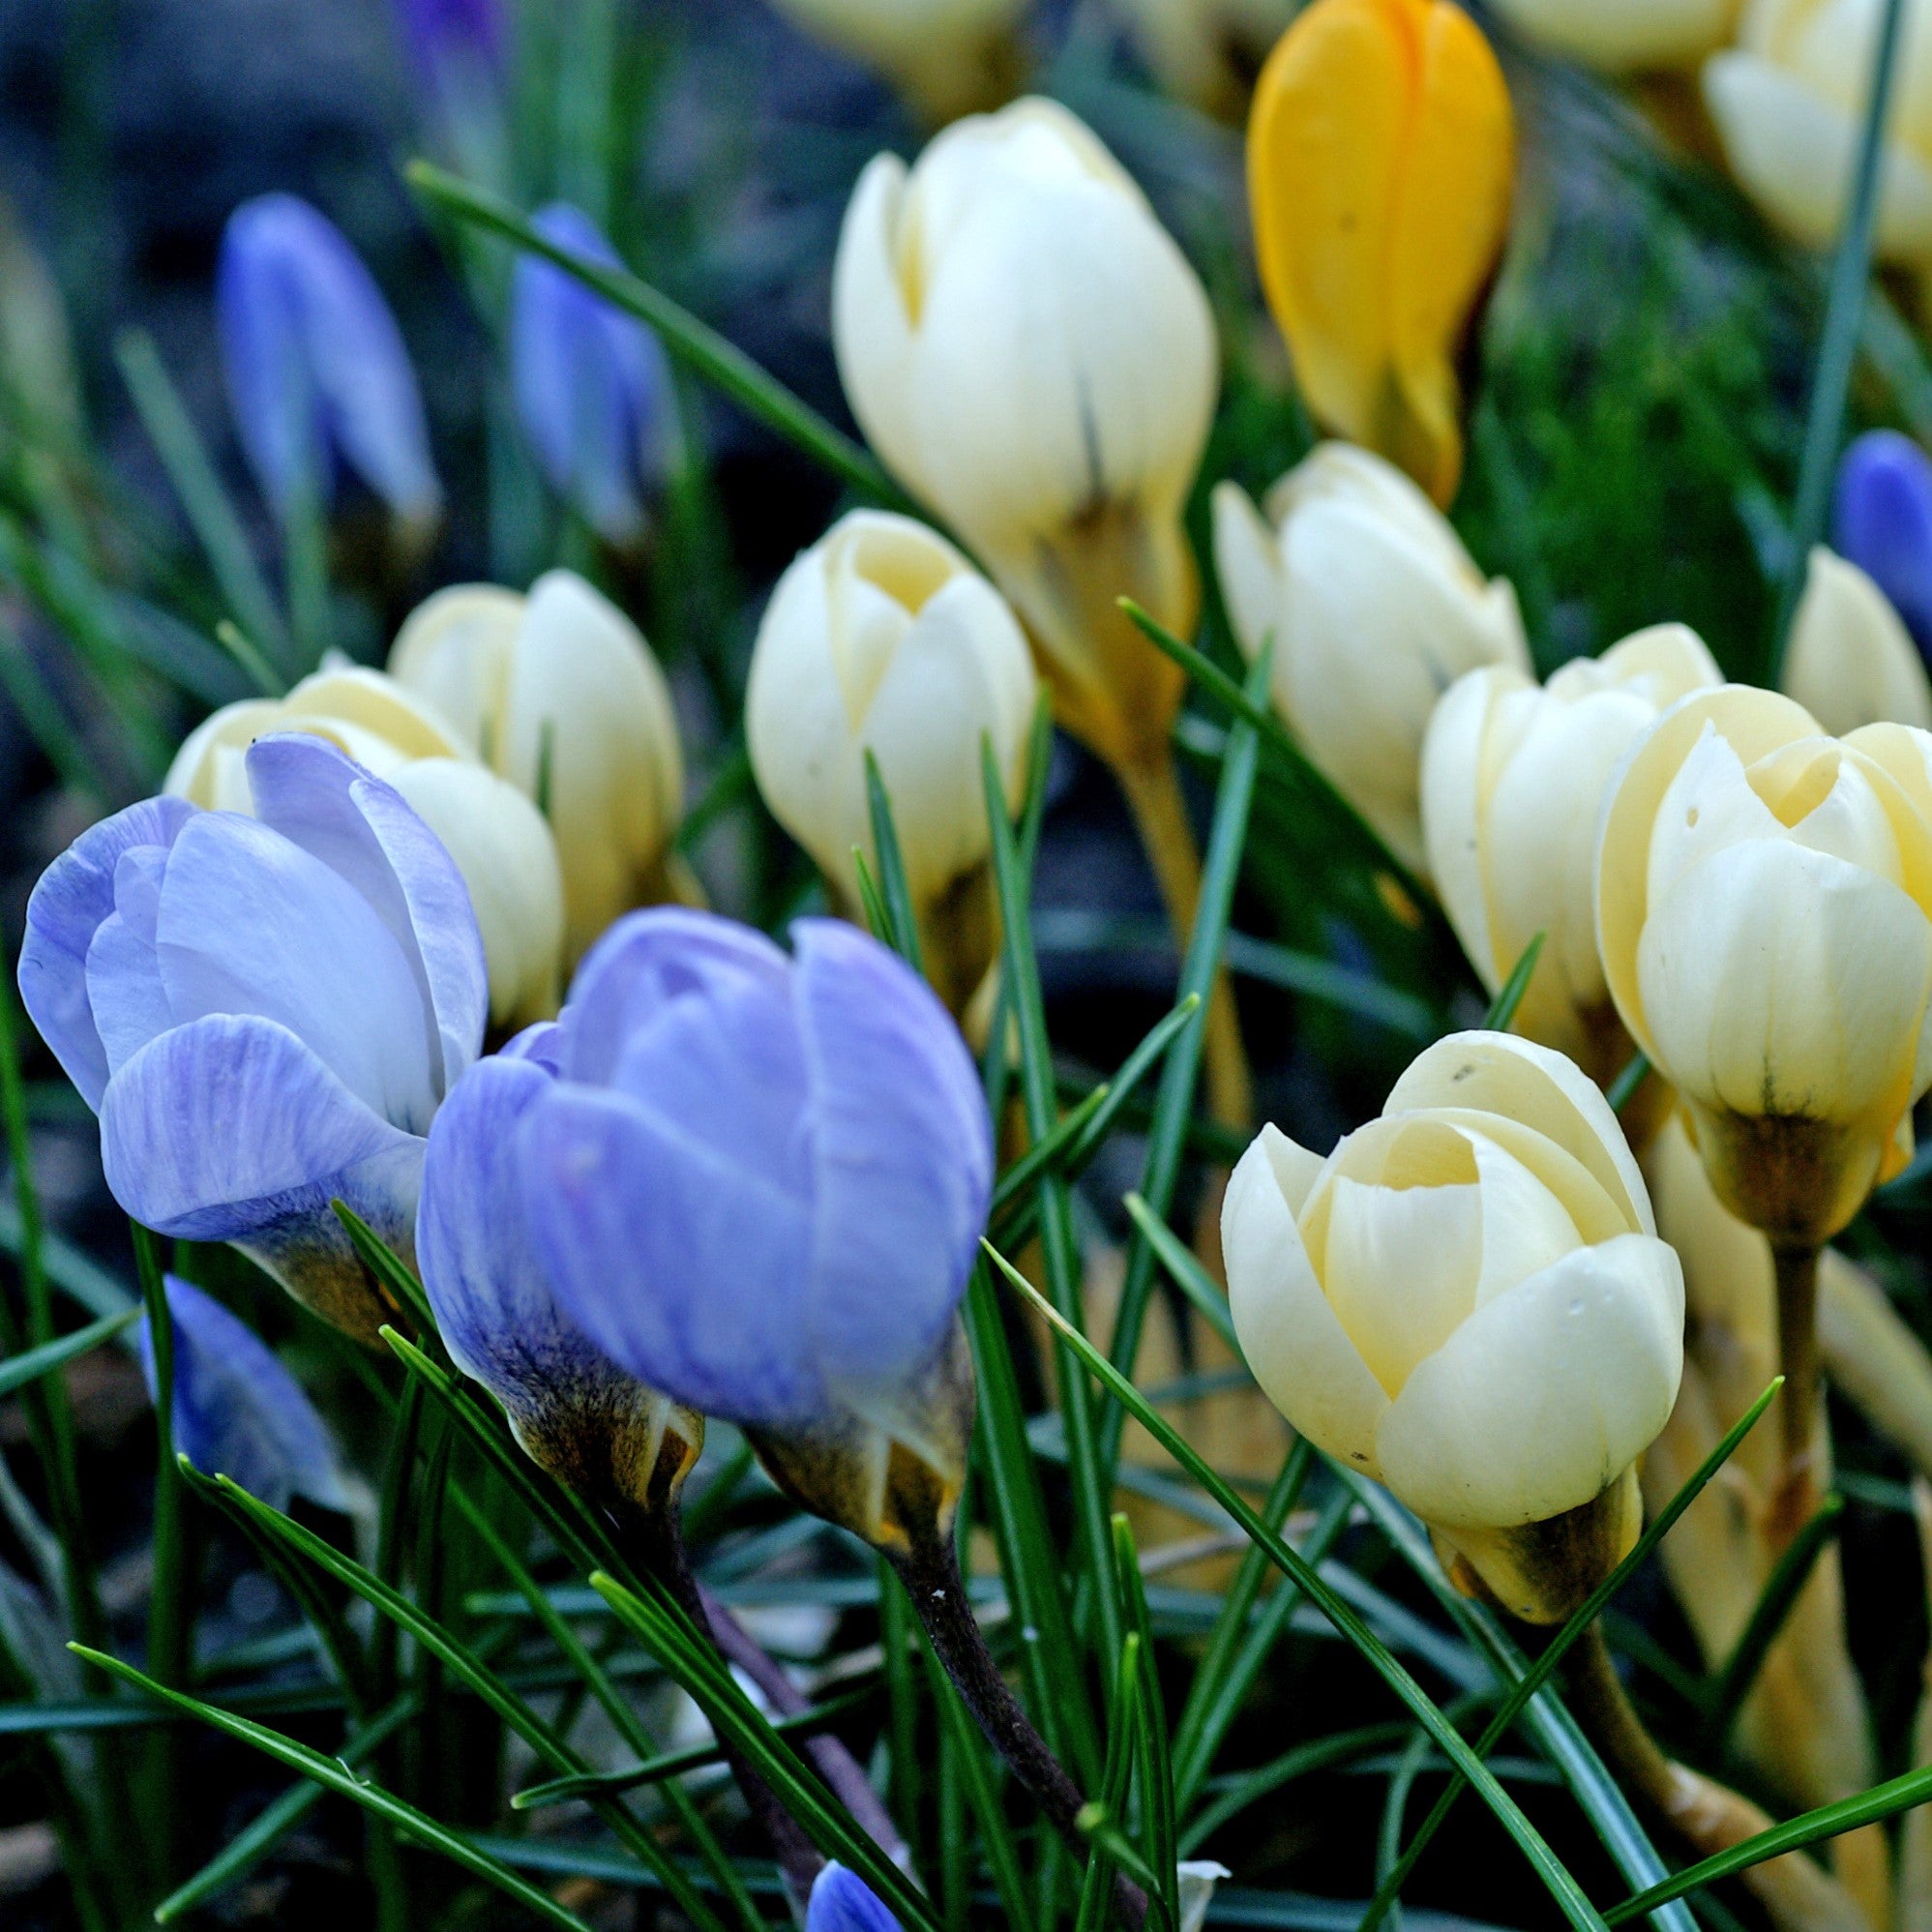 Mixed Pastel Crocus Bulbs For Sale Online Chrysanthus Mix Easy To Grow Bulbs